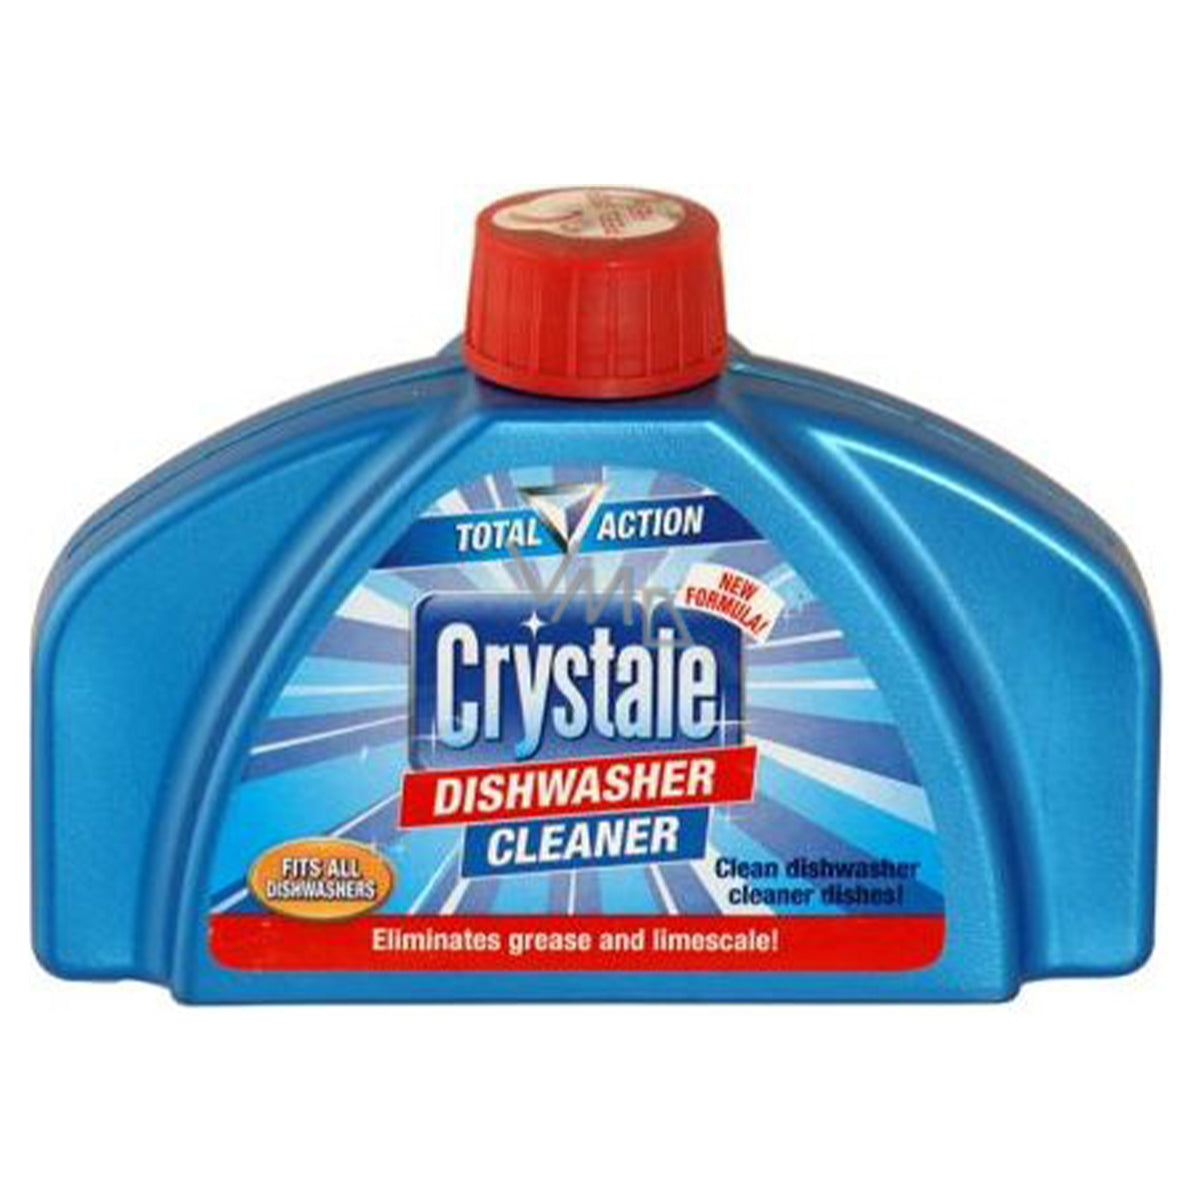 A bottle of Crystale Dishwasher Cleaner - 250ml on a white background.